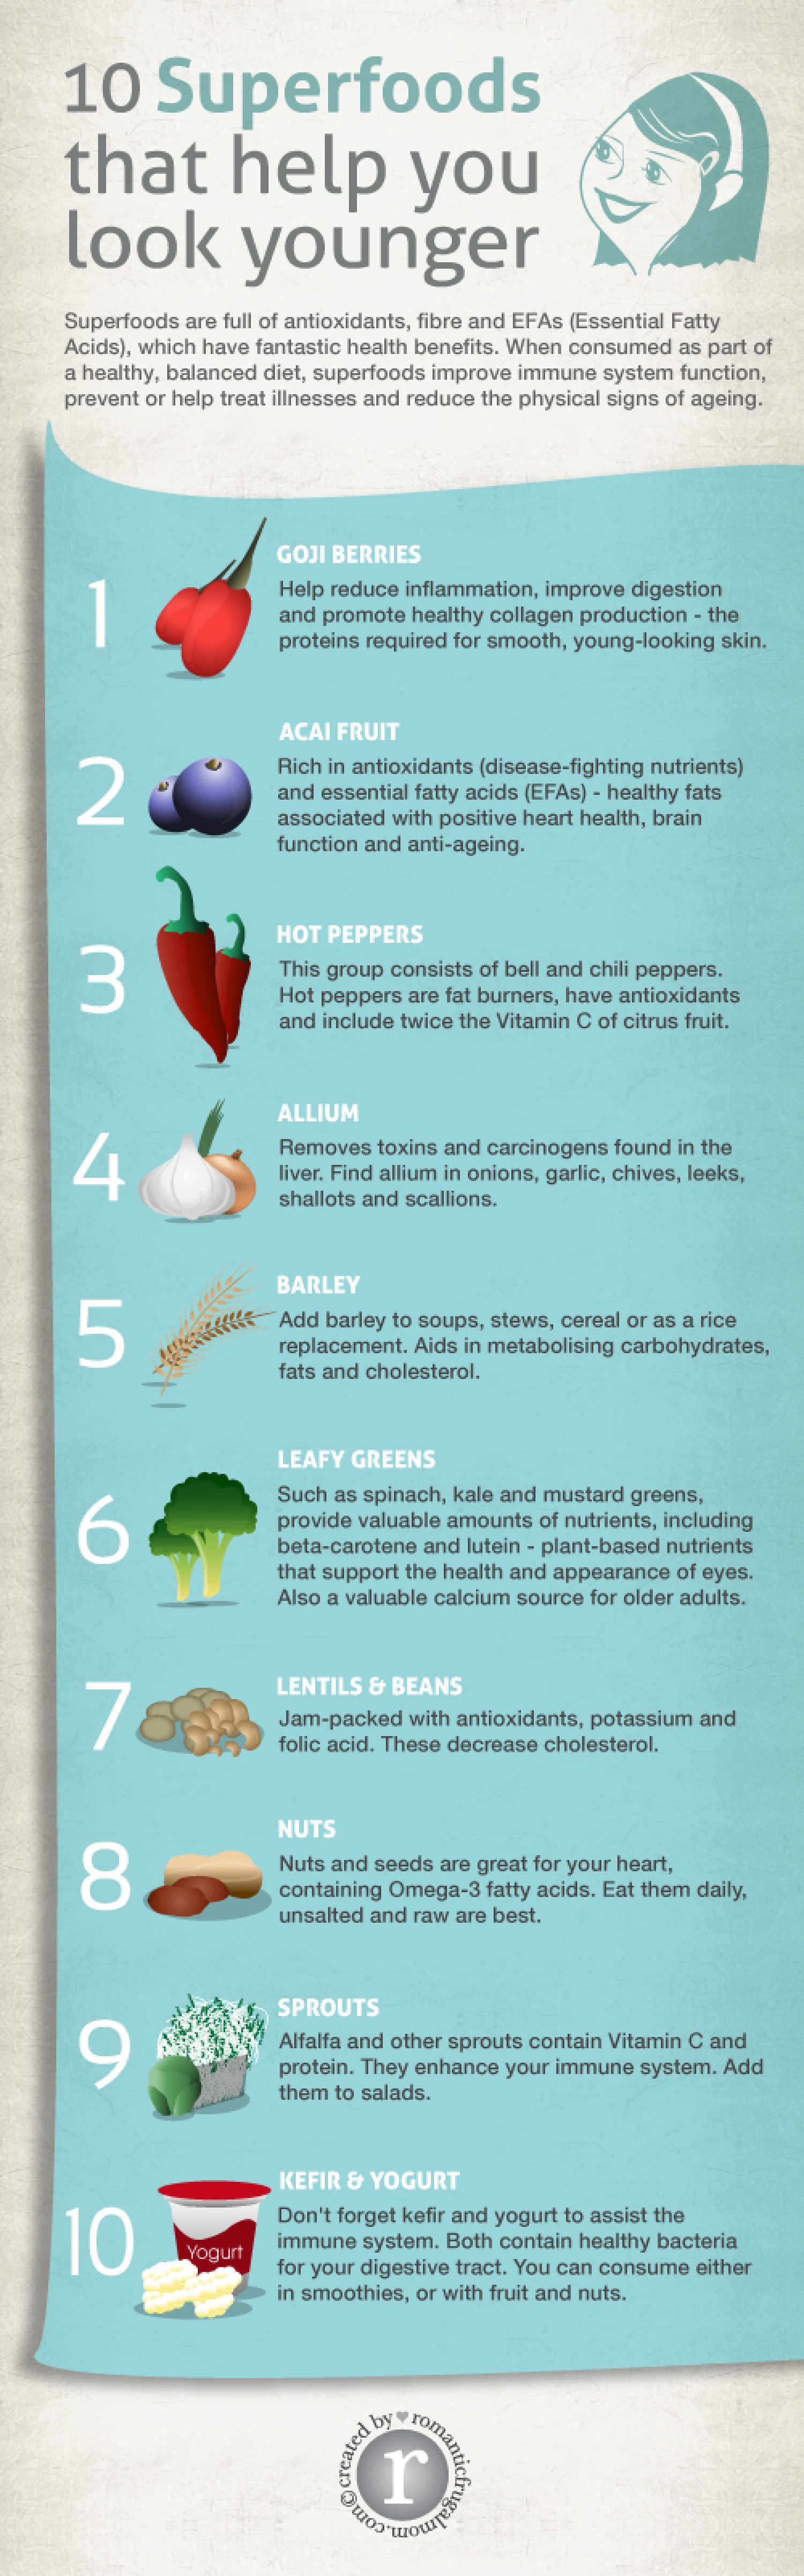 10 Superfoods to Make You Look Younger